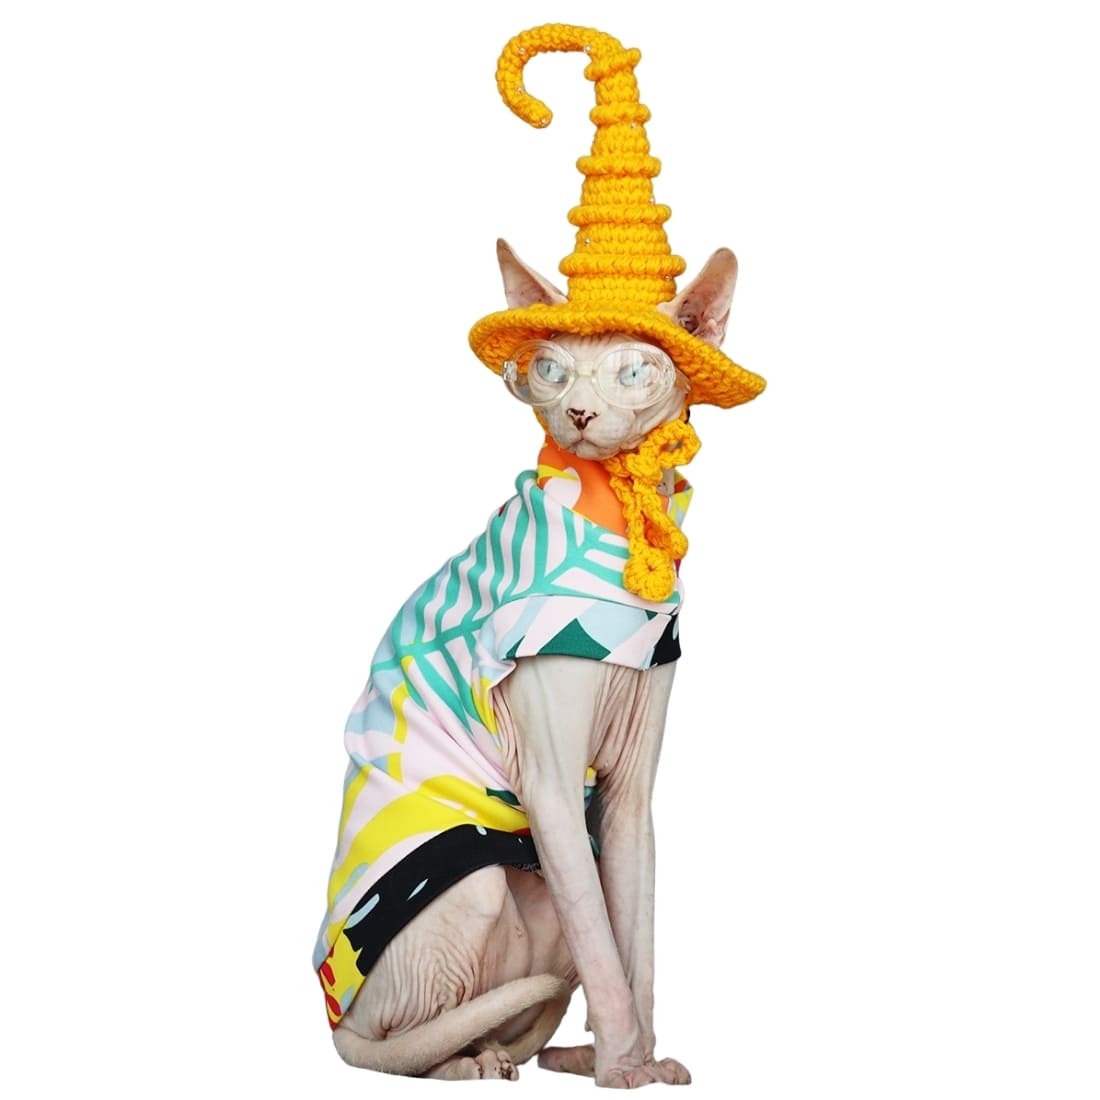 Hairless Cat In Halloween Costume | A "Must-have" Halloween Costume